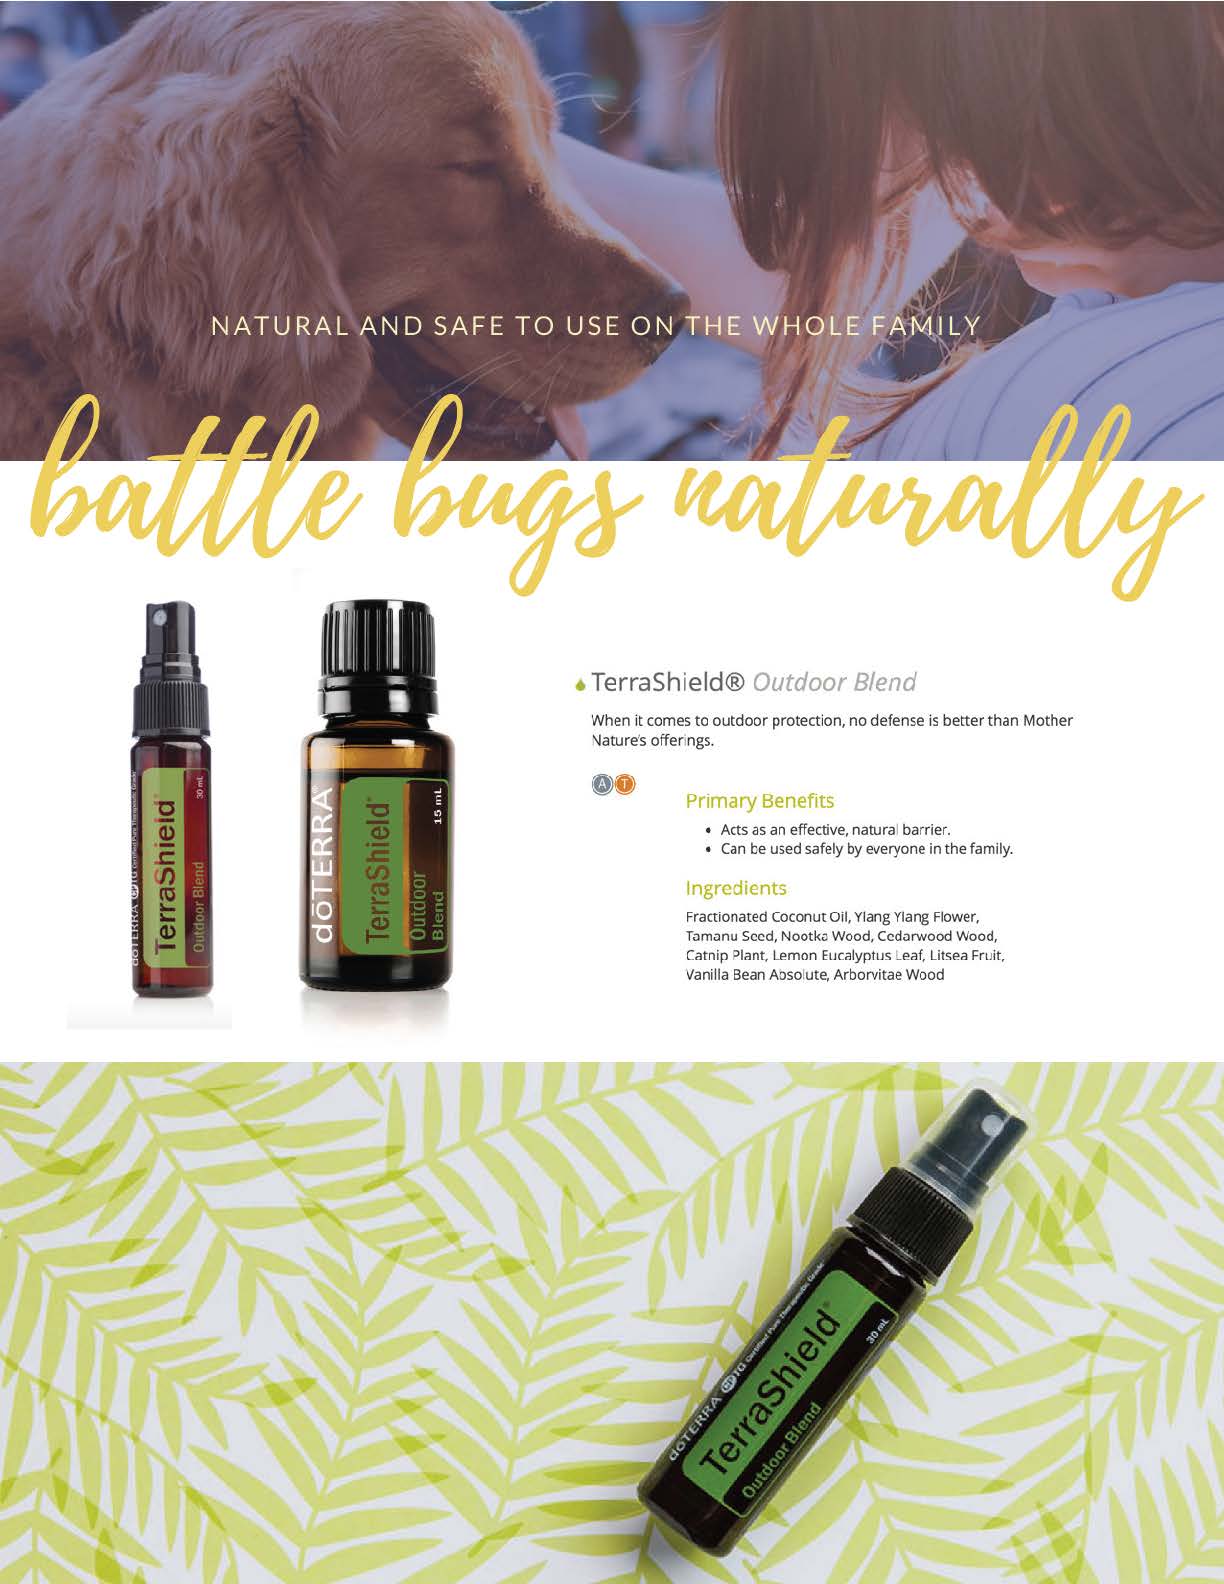 doTERRA essential oils for battling the bugs.